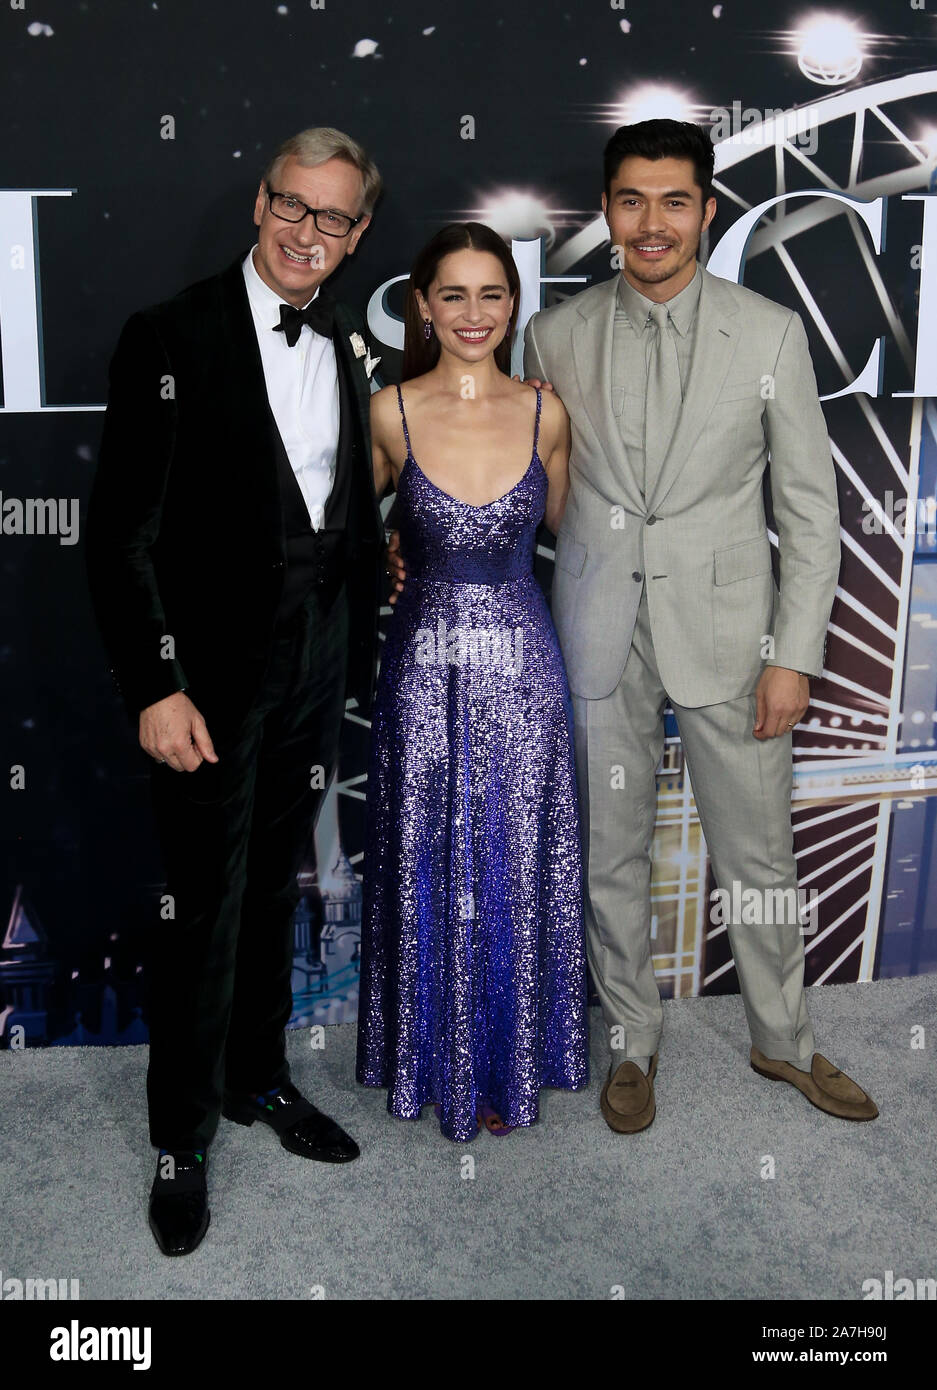 (L-R) Paul Feig, Emilia Clarke and Henry Golding attend the premiere of 'Last Christmas' at AMC Lincoln Square on October 29, 2019 in New York City. Stock Photo